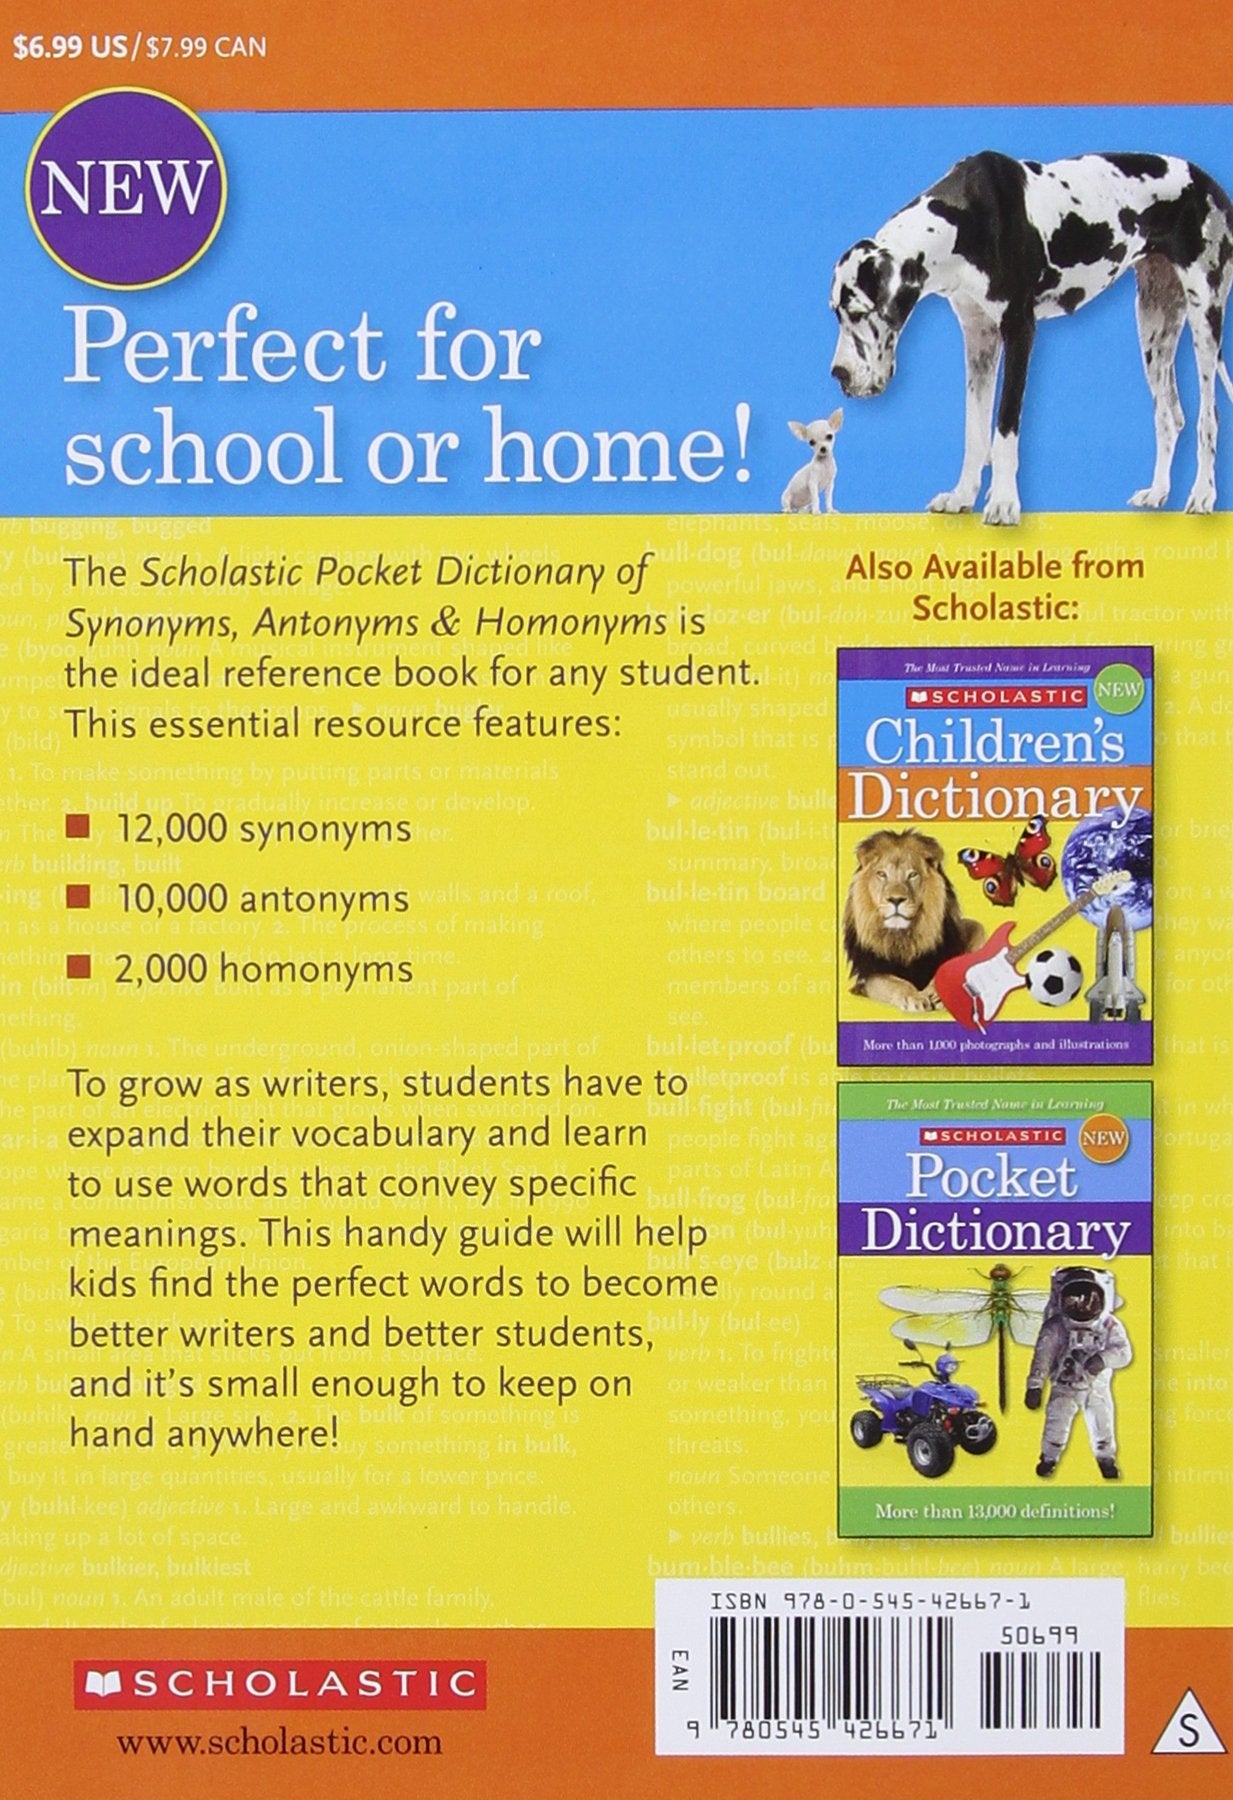 "Scholastic Pocket Dictionary of Synonyms, Antonyms, Homonyms"